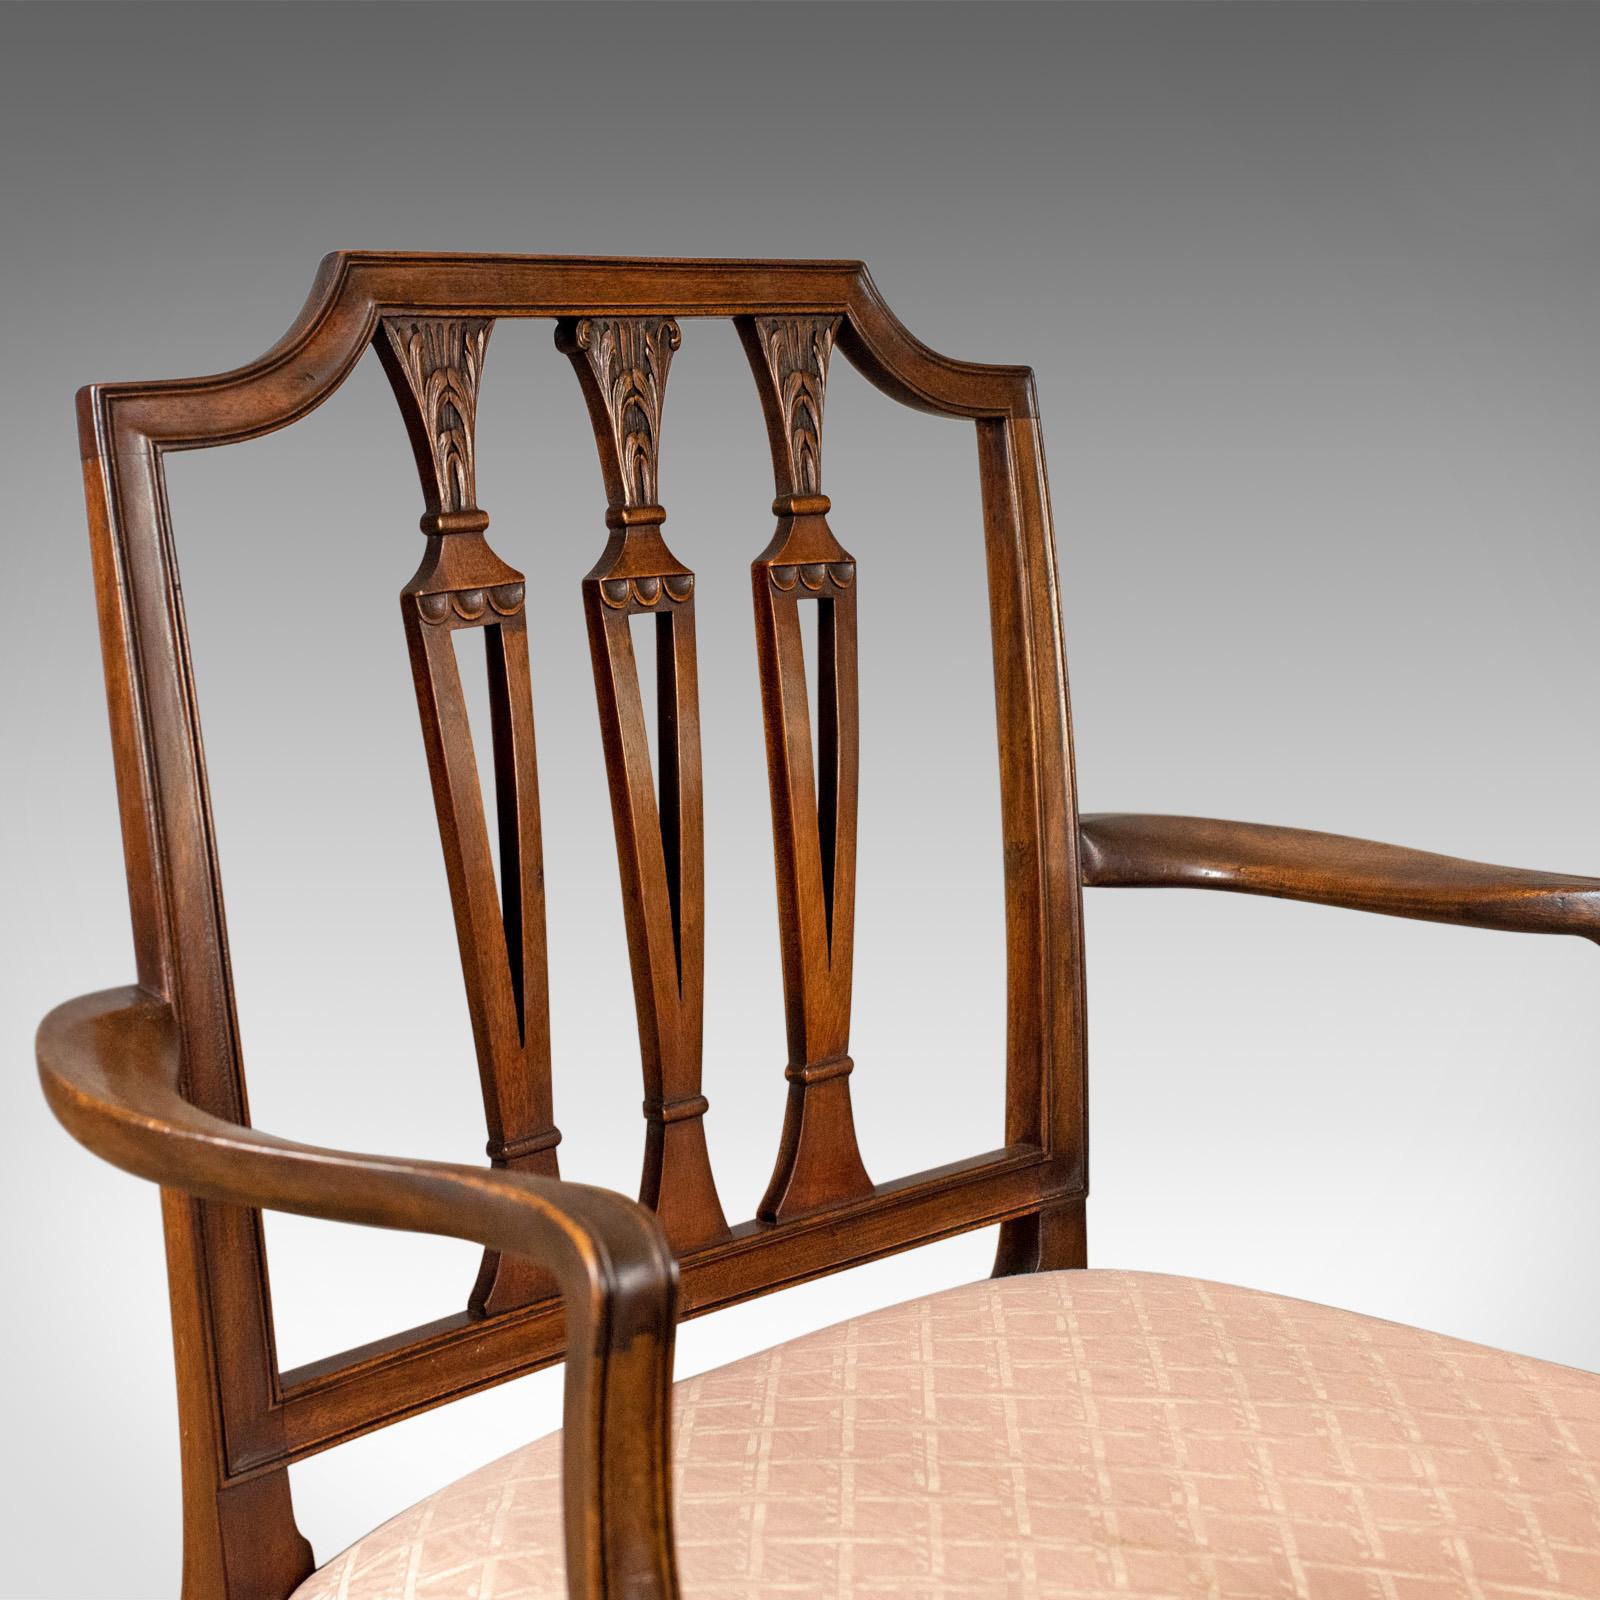 Set of Six Antique Dining Chairs, Mahogany, Victorian, Sheraton Revival 2